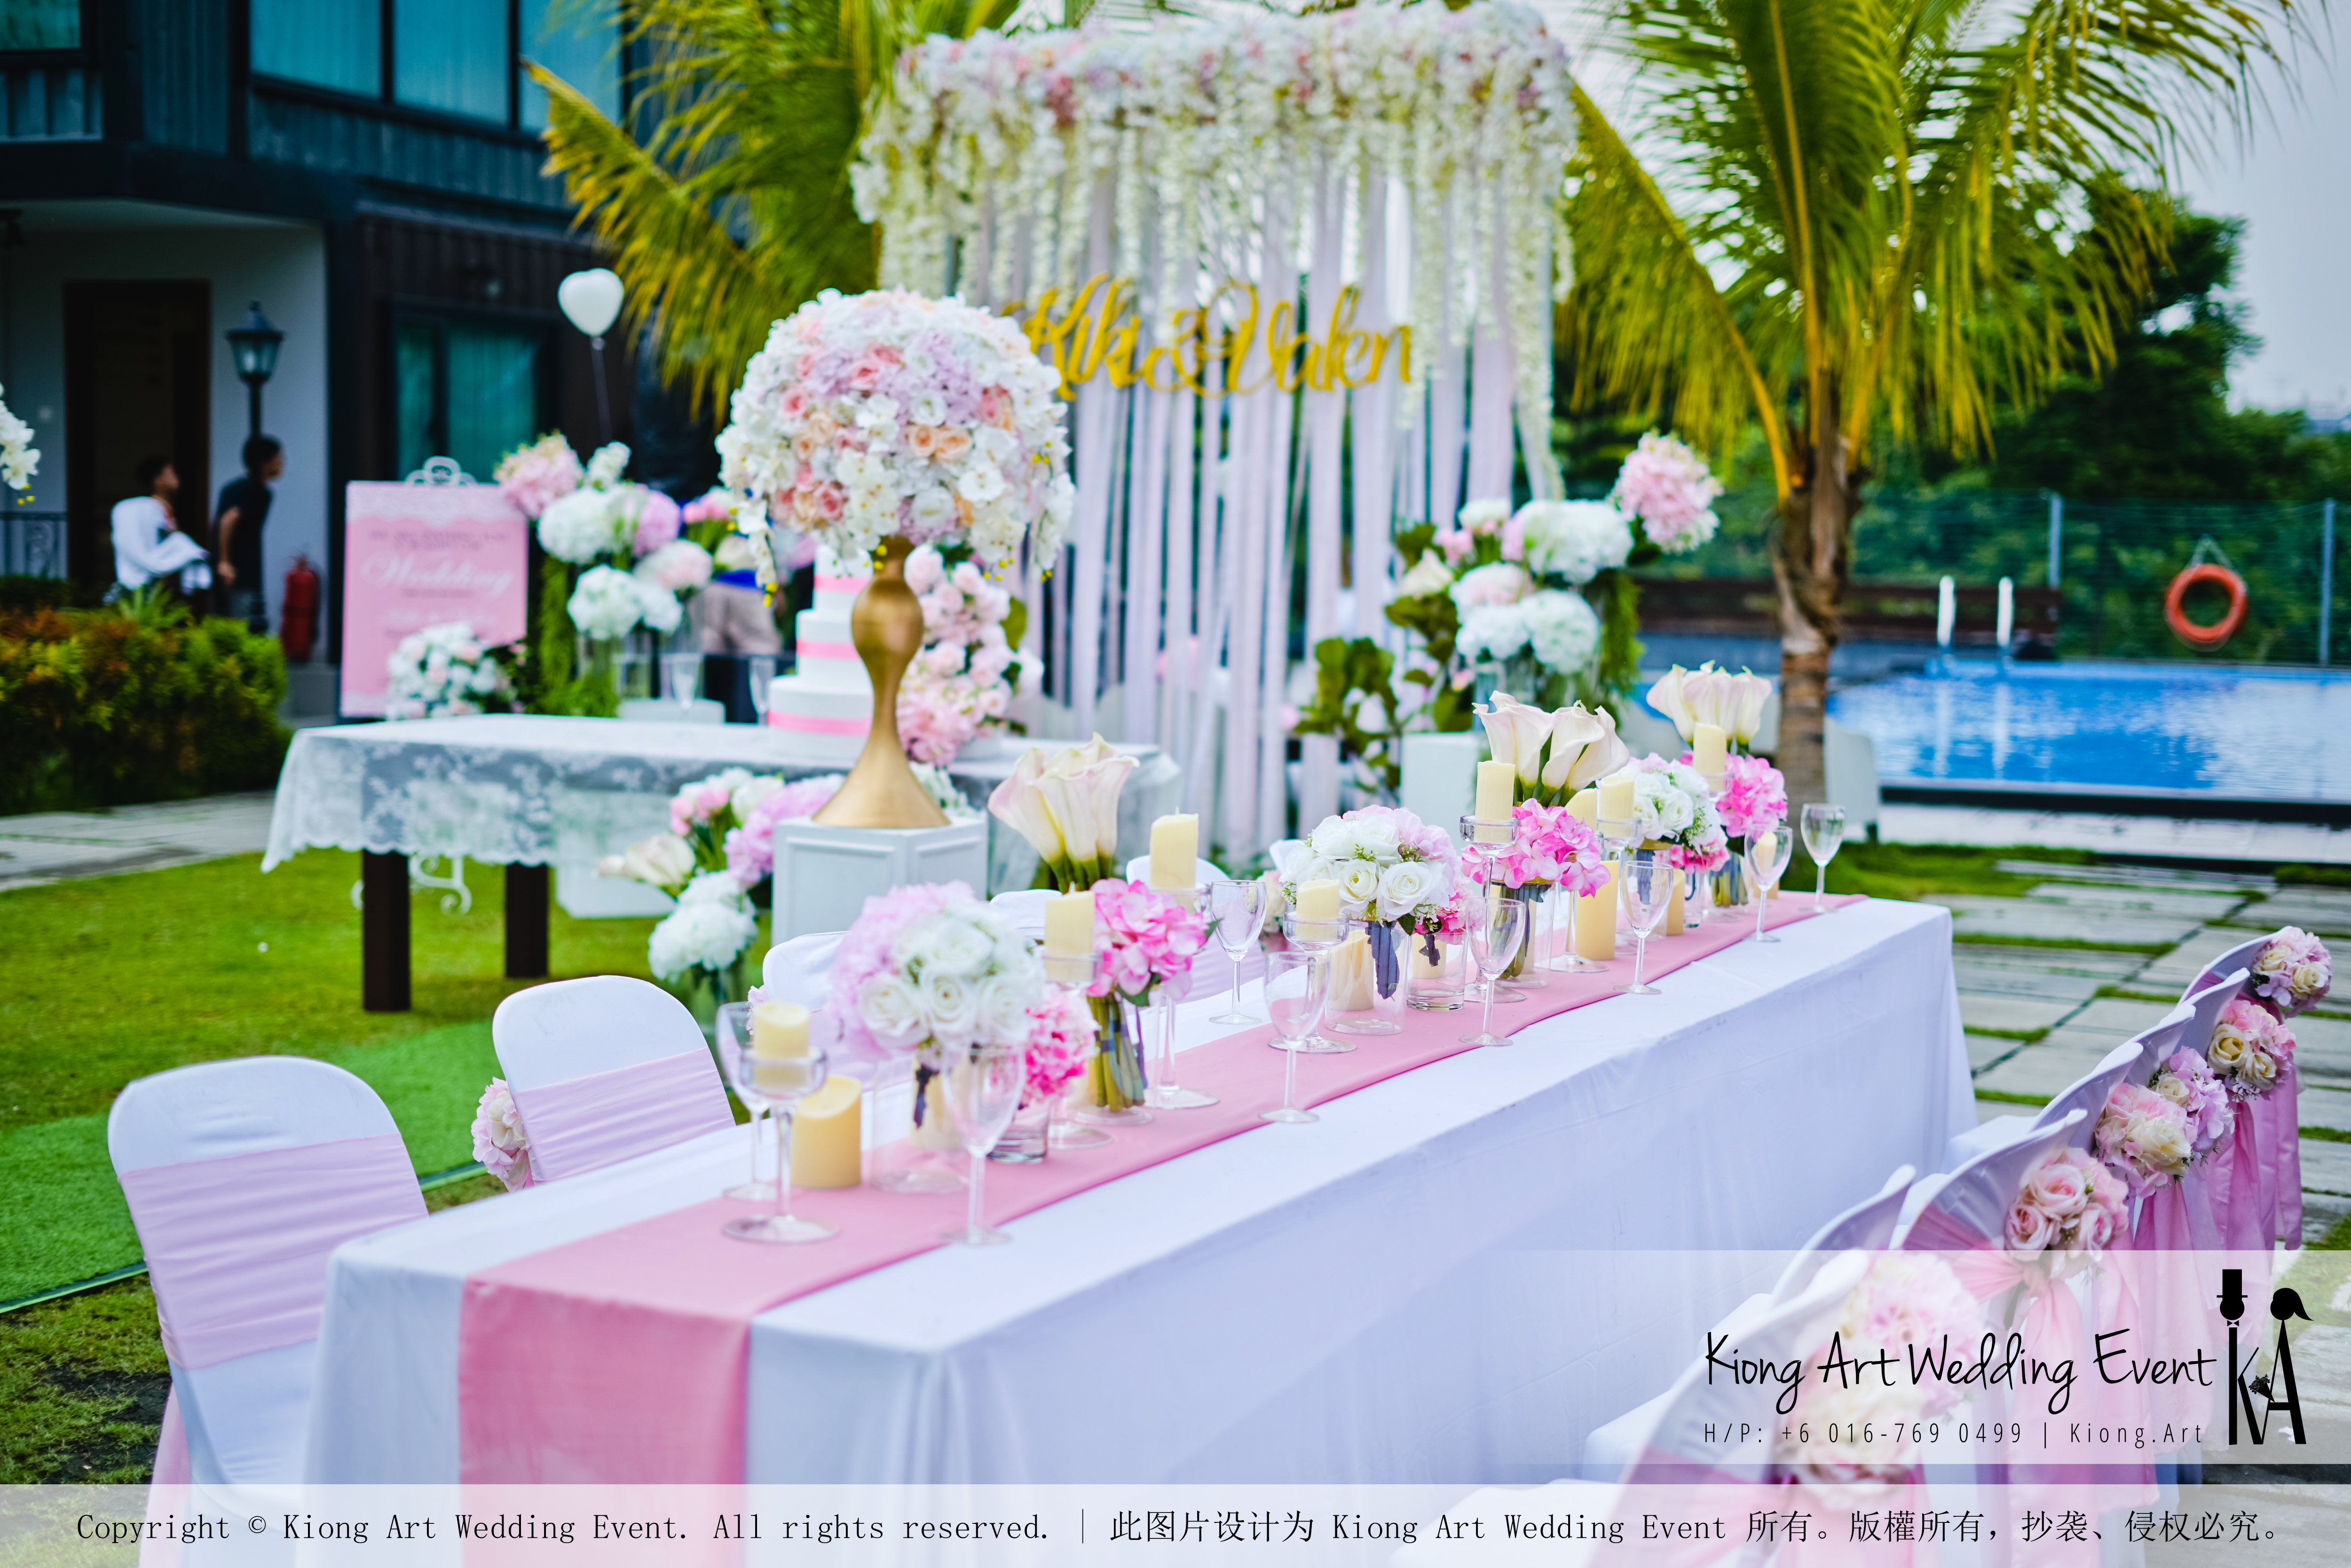 Kiong Art Wedding Event Kuala Lumpur Malaysia Wedding Decoration One-stop Wedding Planning Warm Outdoor Romantic Style Theme Kluang Container Swimming Pool Homestay A07-A01-02